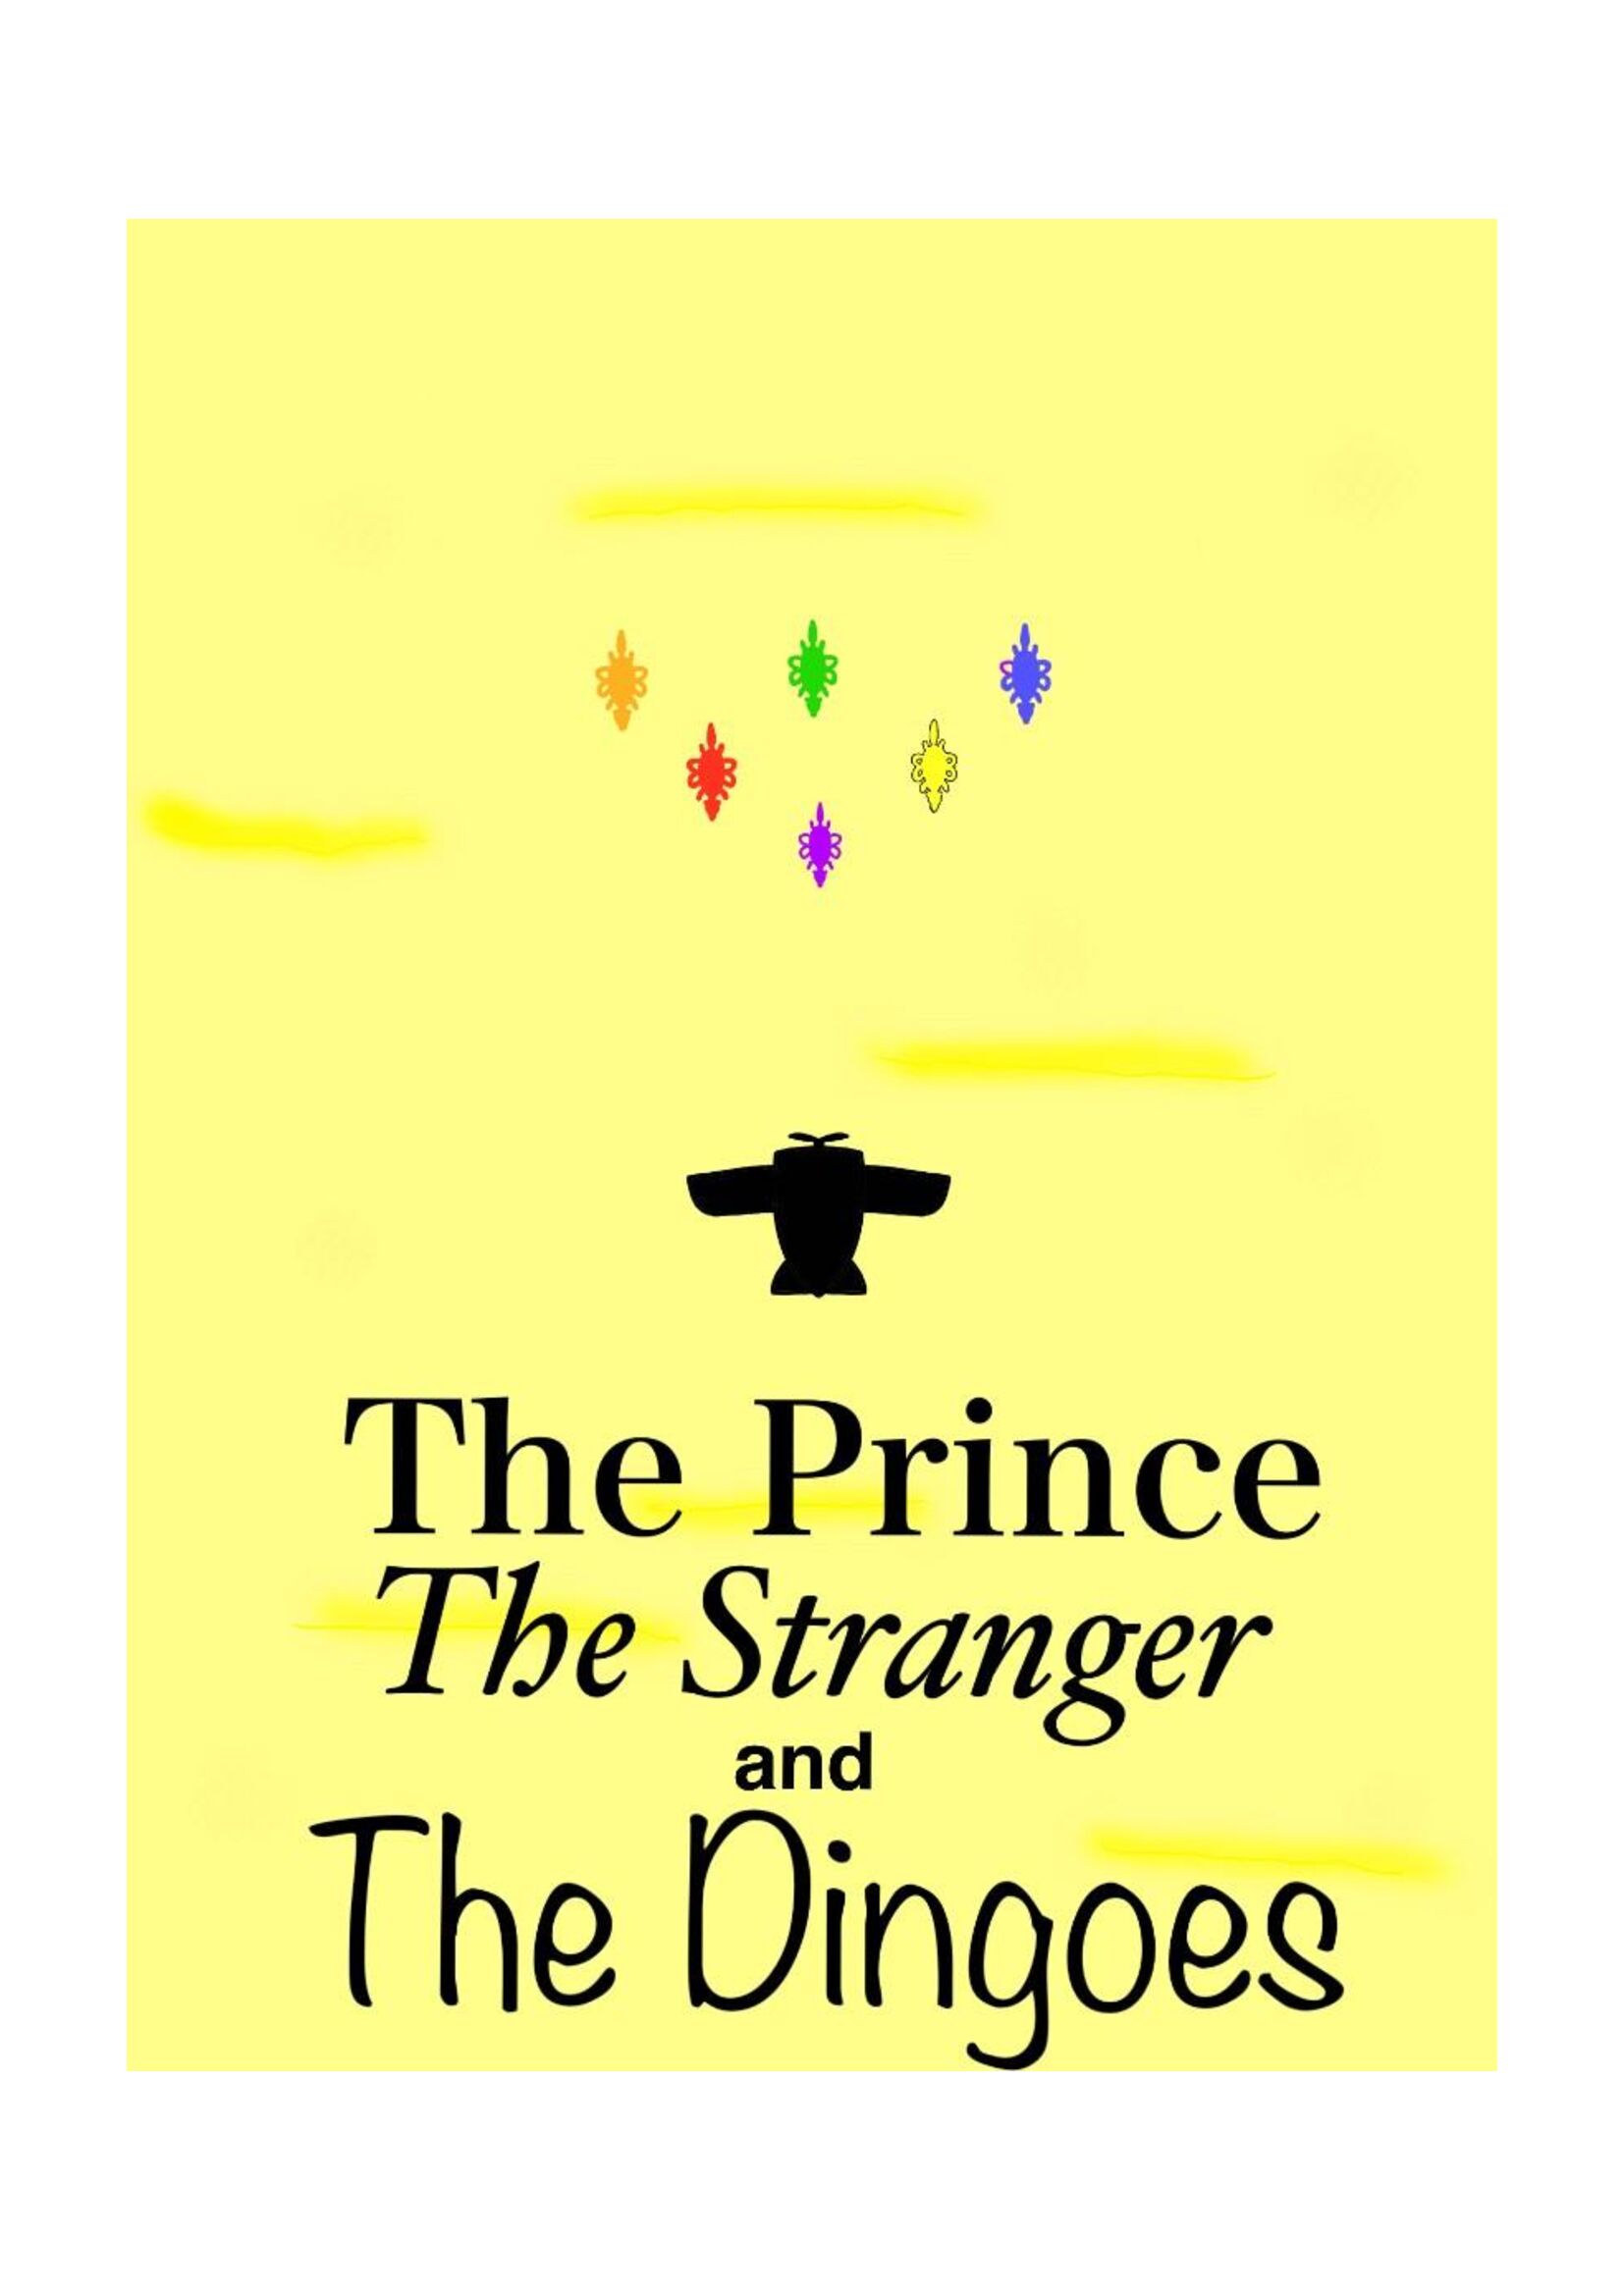 The Prince The Stranger and The Dingoes